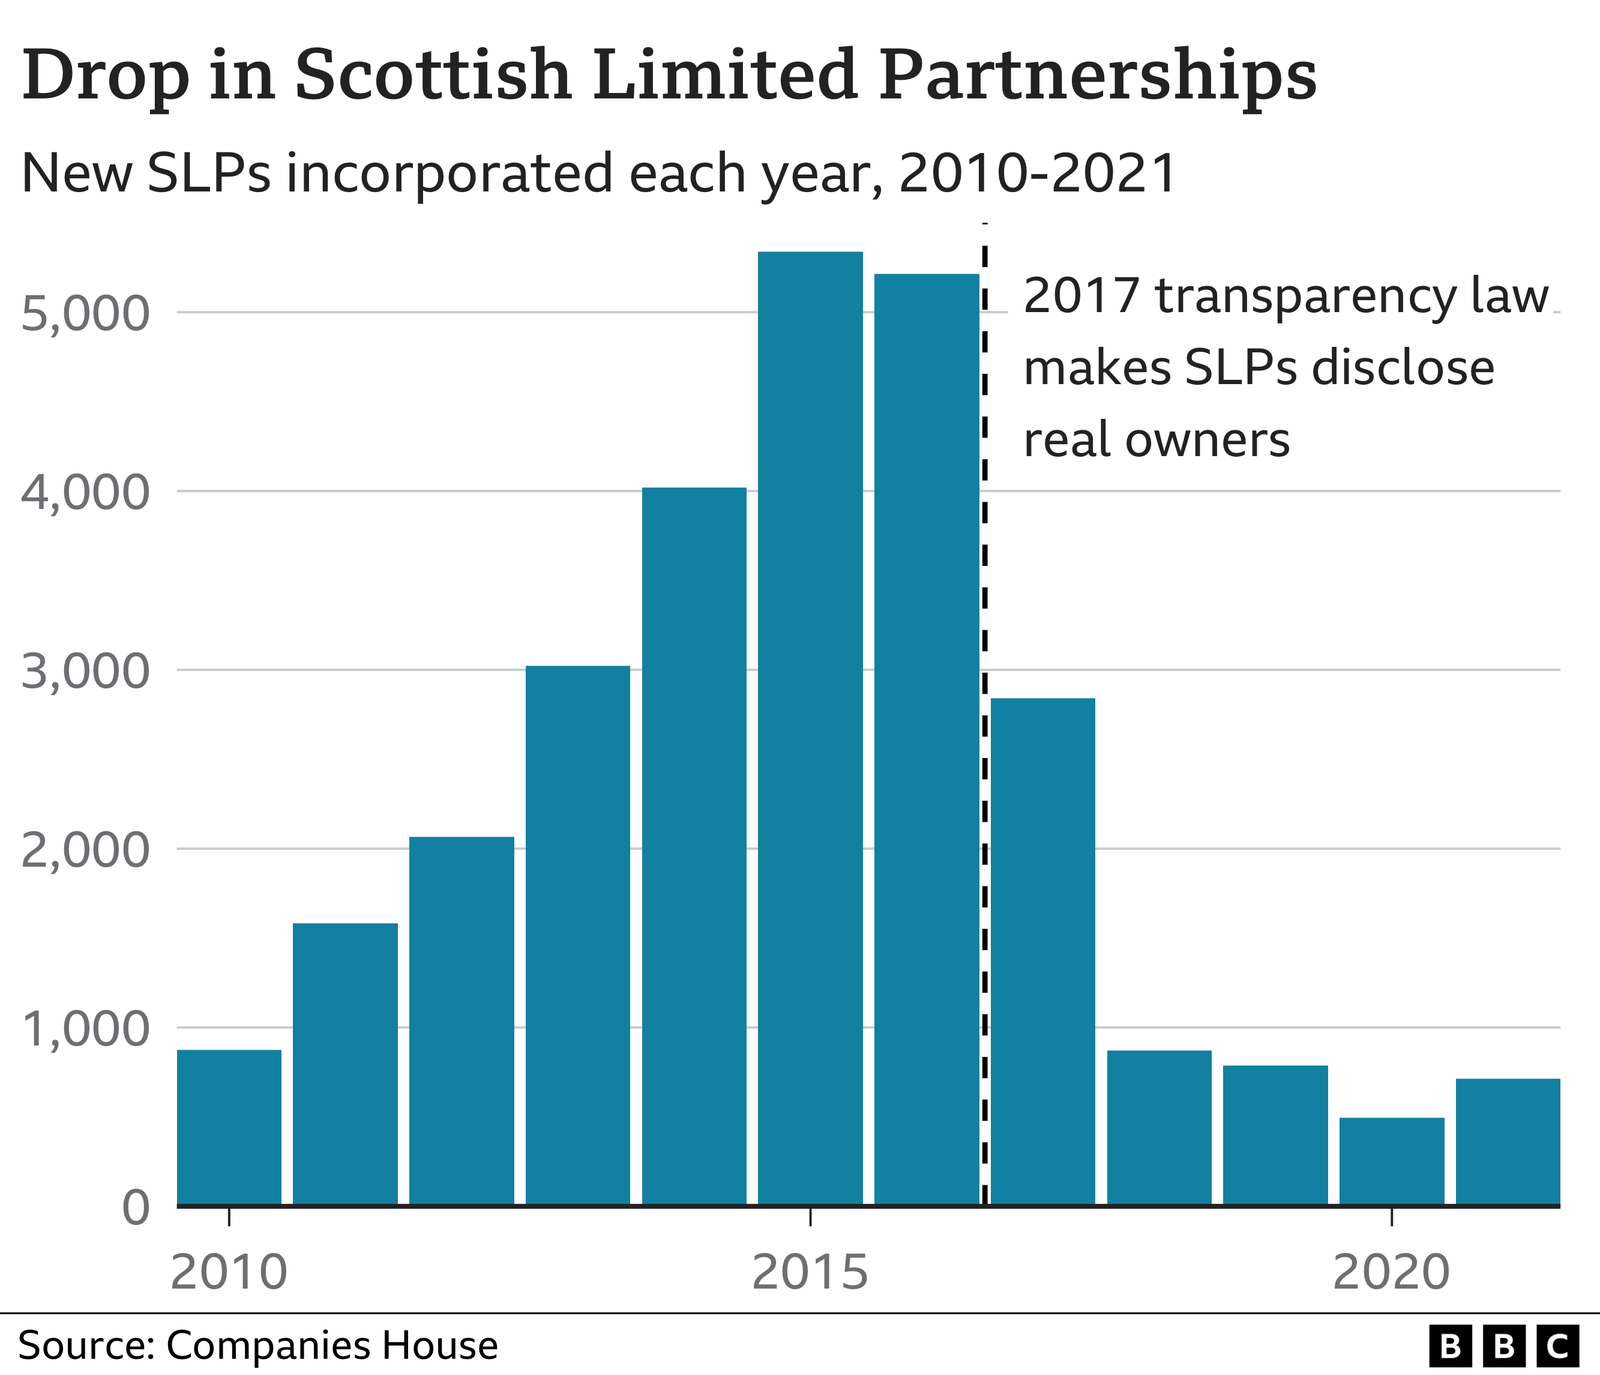 Chart showing a significant drop in Scottish Limited Partnerships (SLPs) after 2017 transparency law makes SLPs disclose their real owners